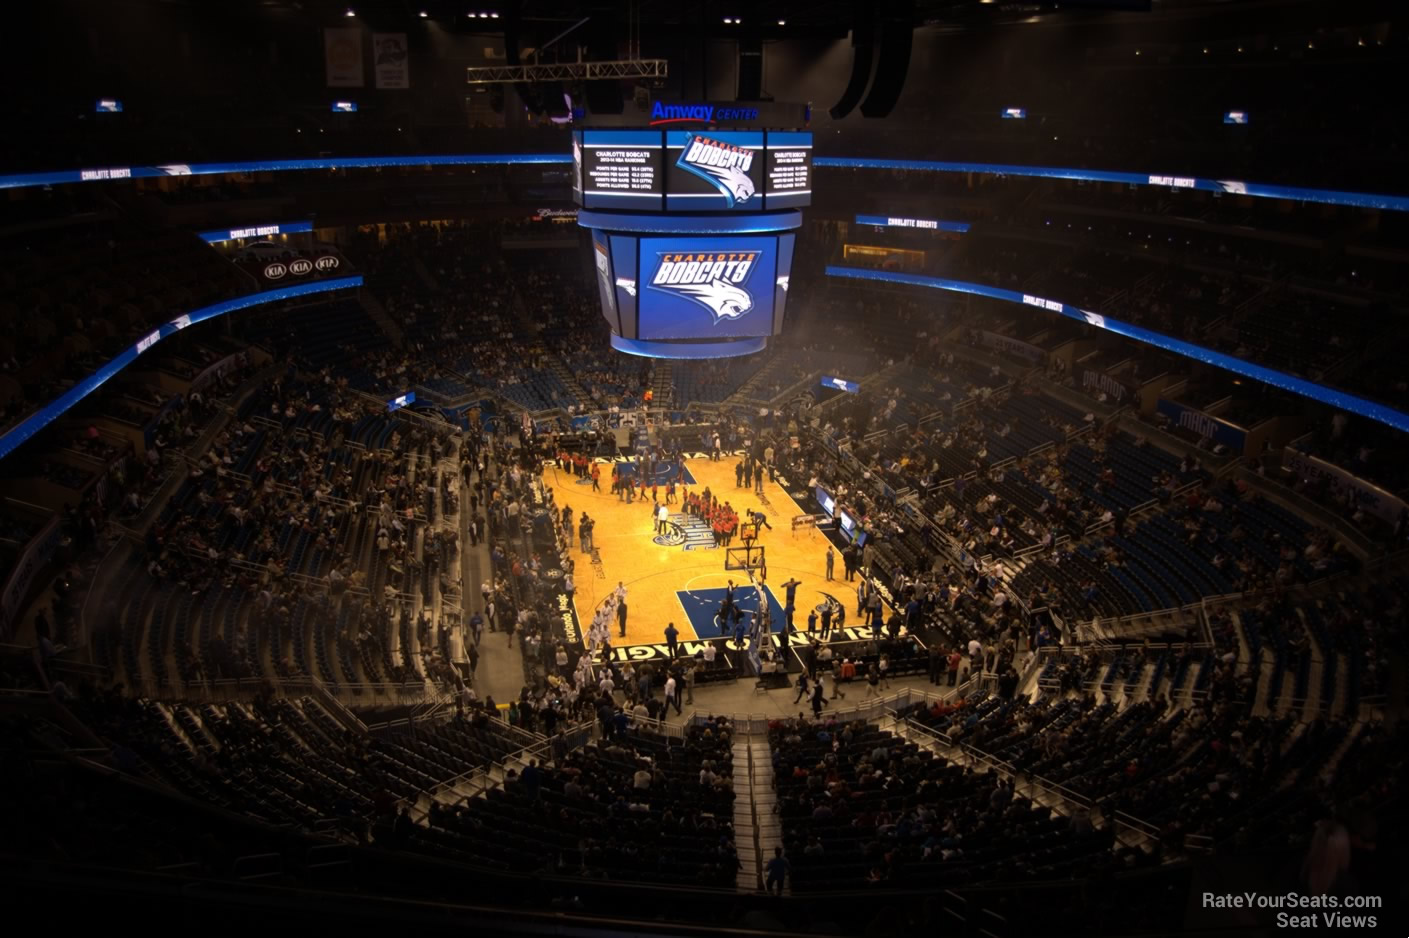 section 218 seat view  for basketball - amway center